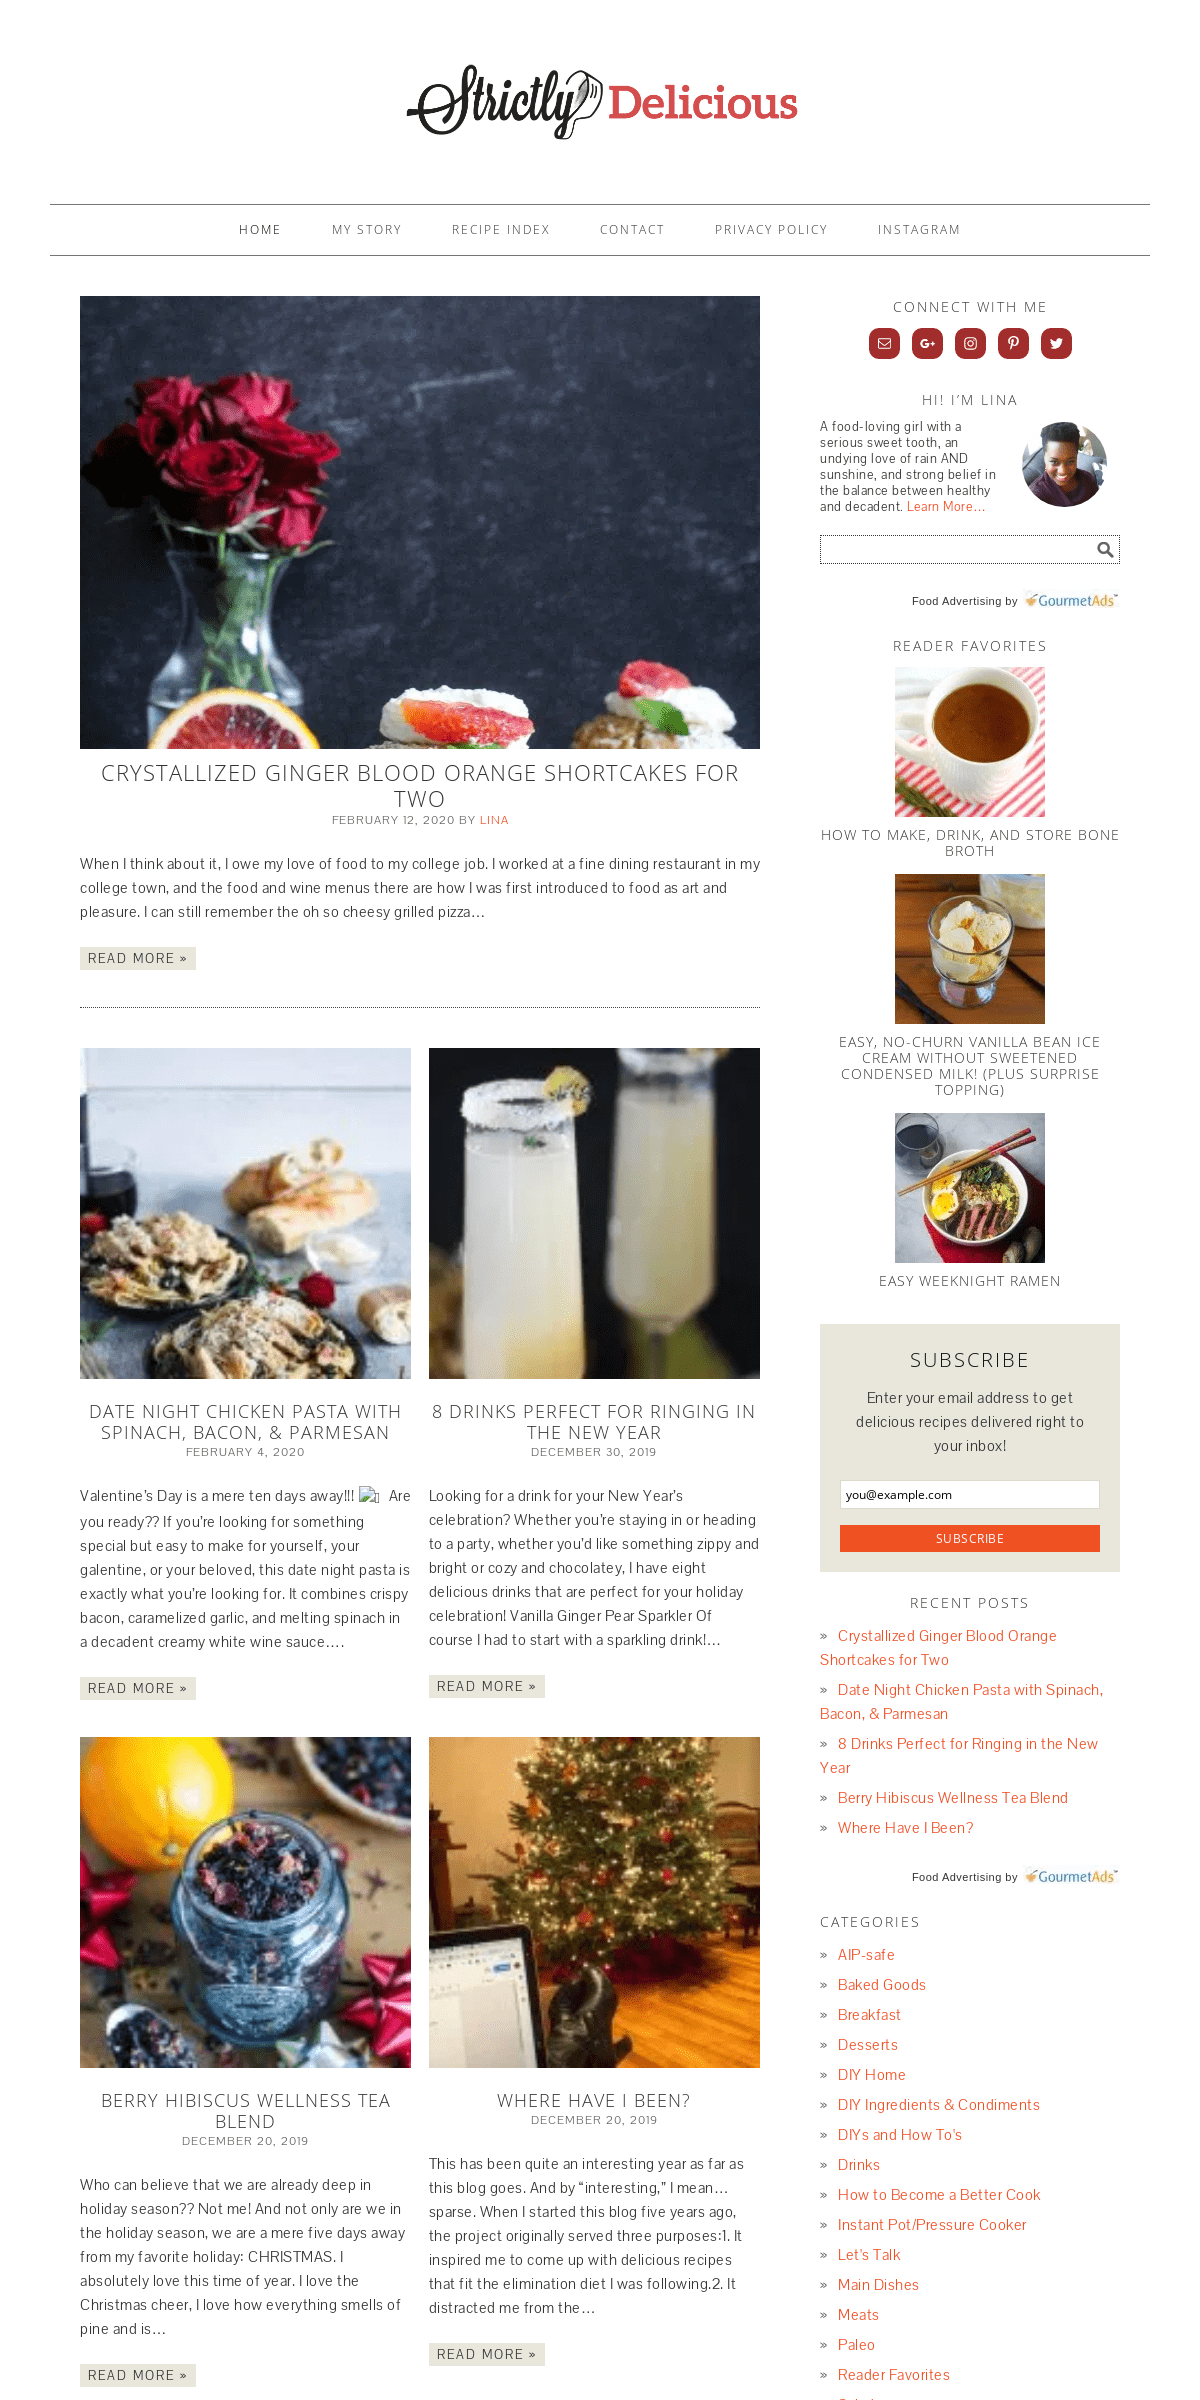 A complete backup of strictlydelicious.com